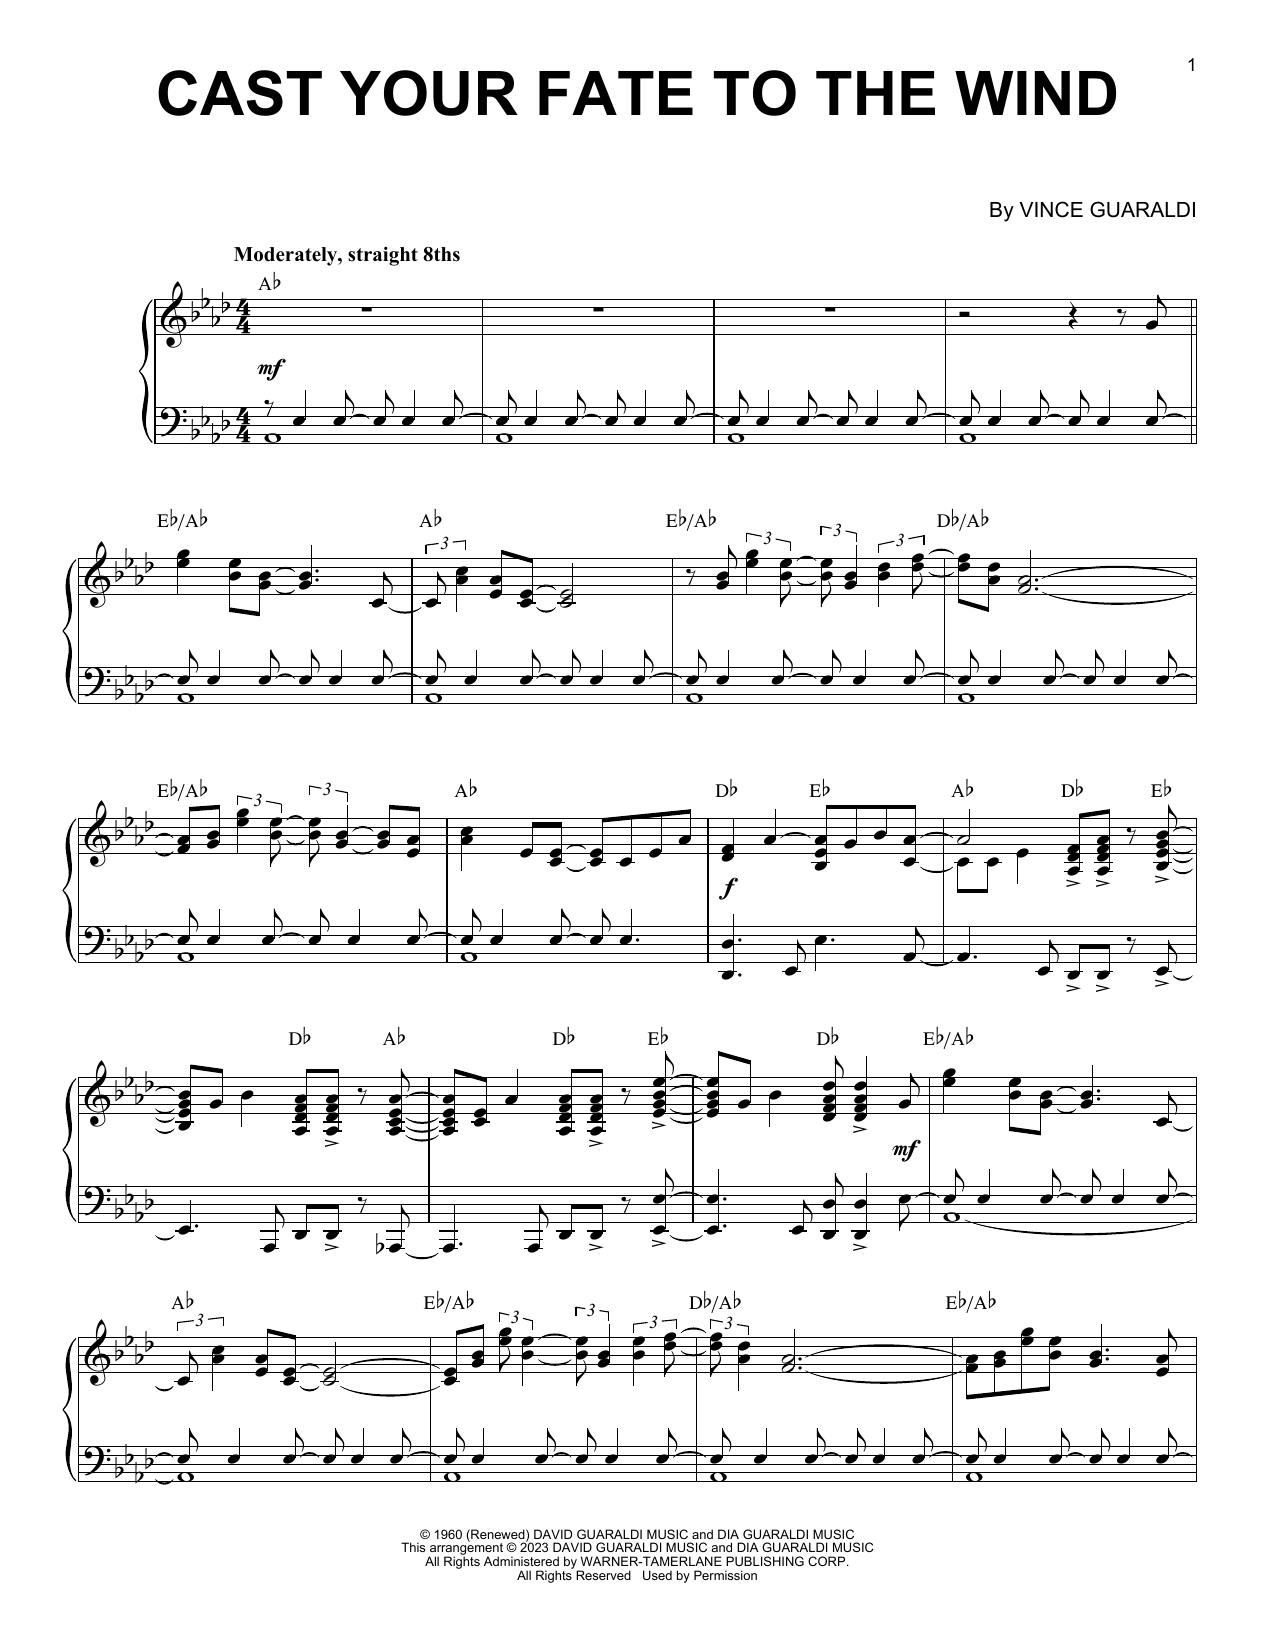 Download Vince Guaraldi Cast Your Fate To The Wind [Jazz versio Sheet Music